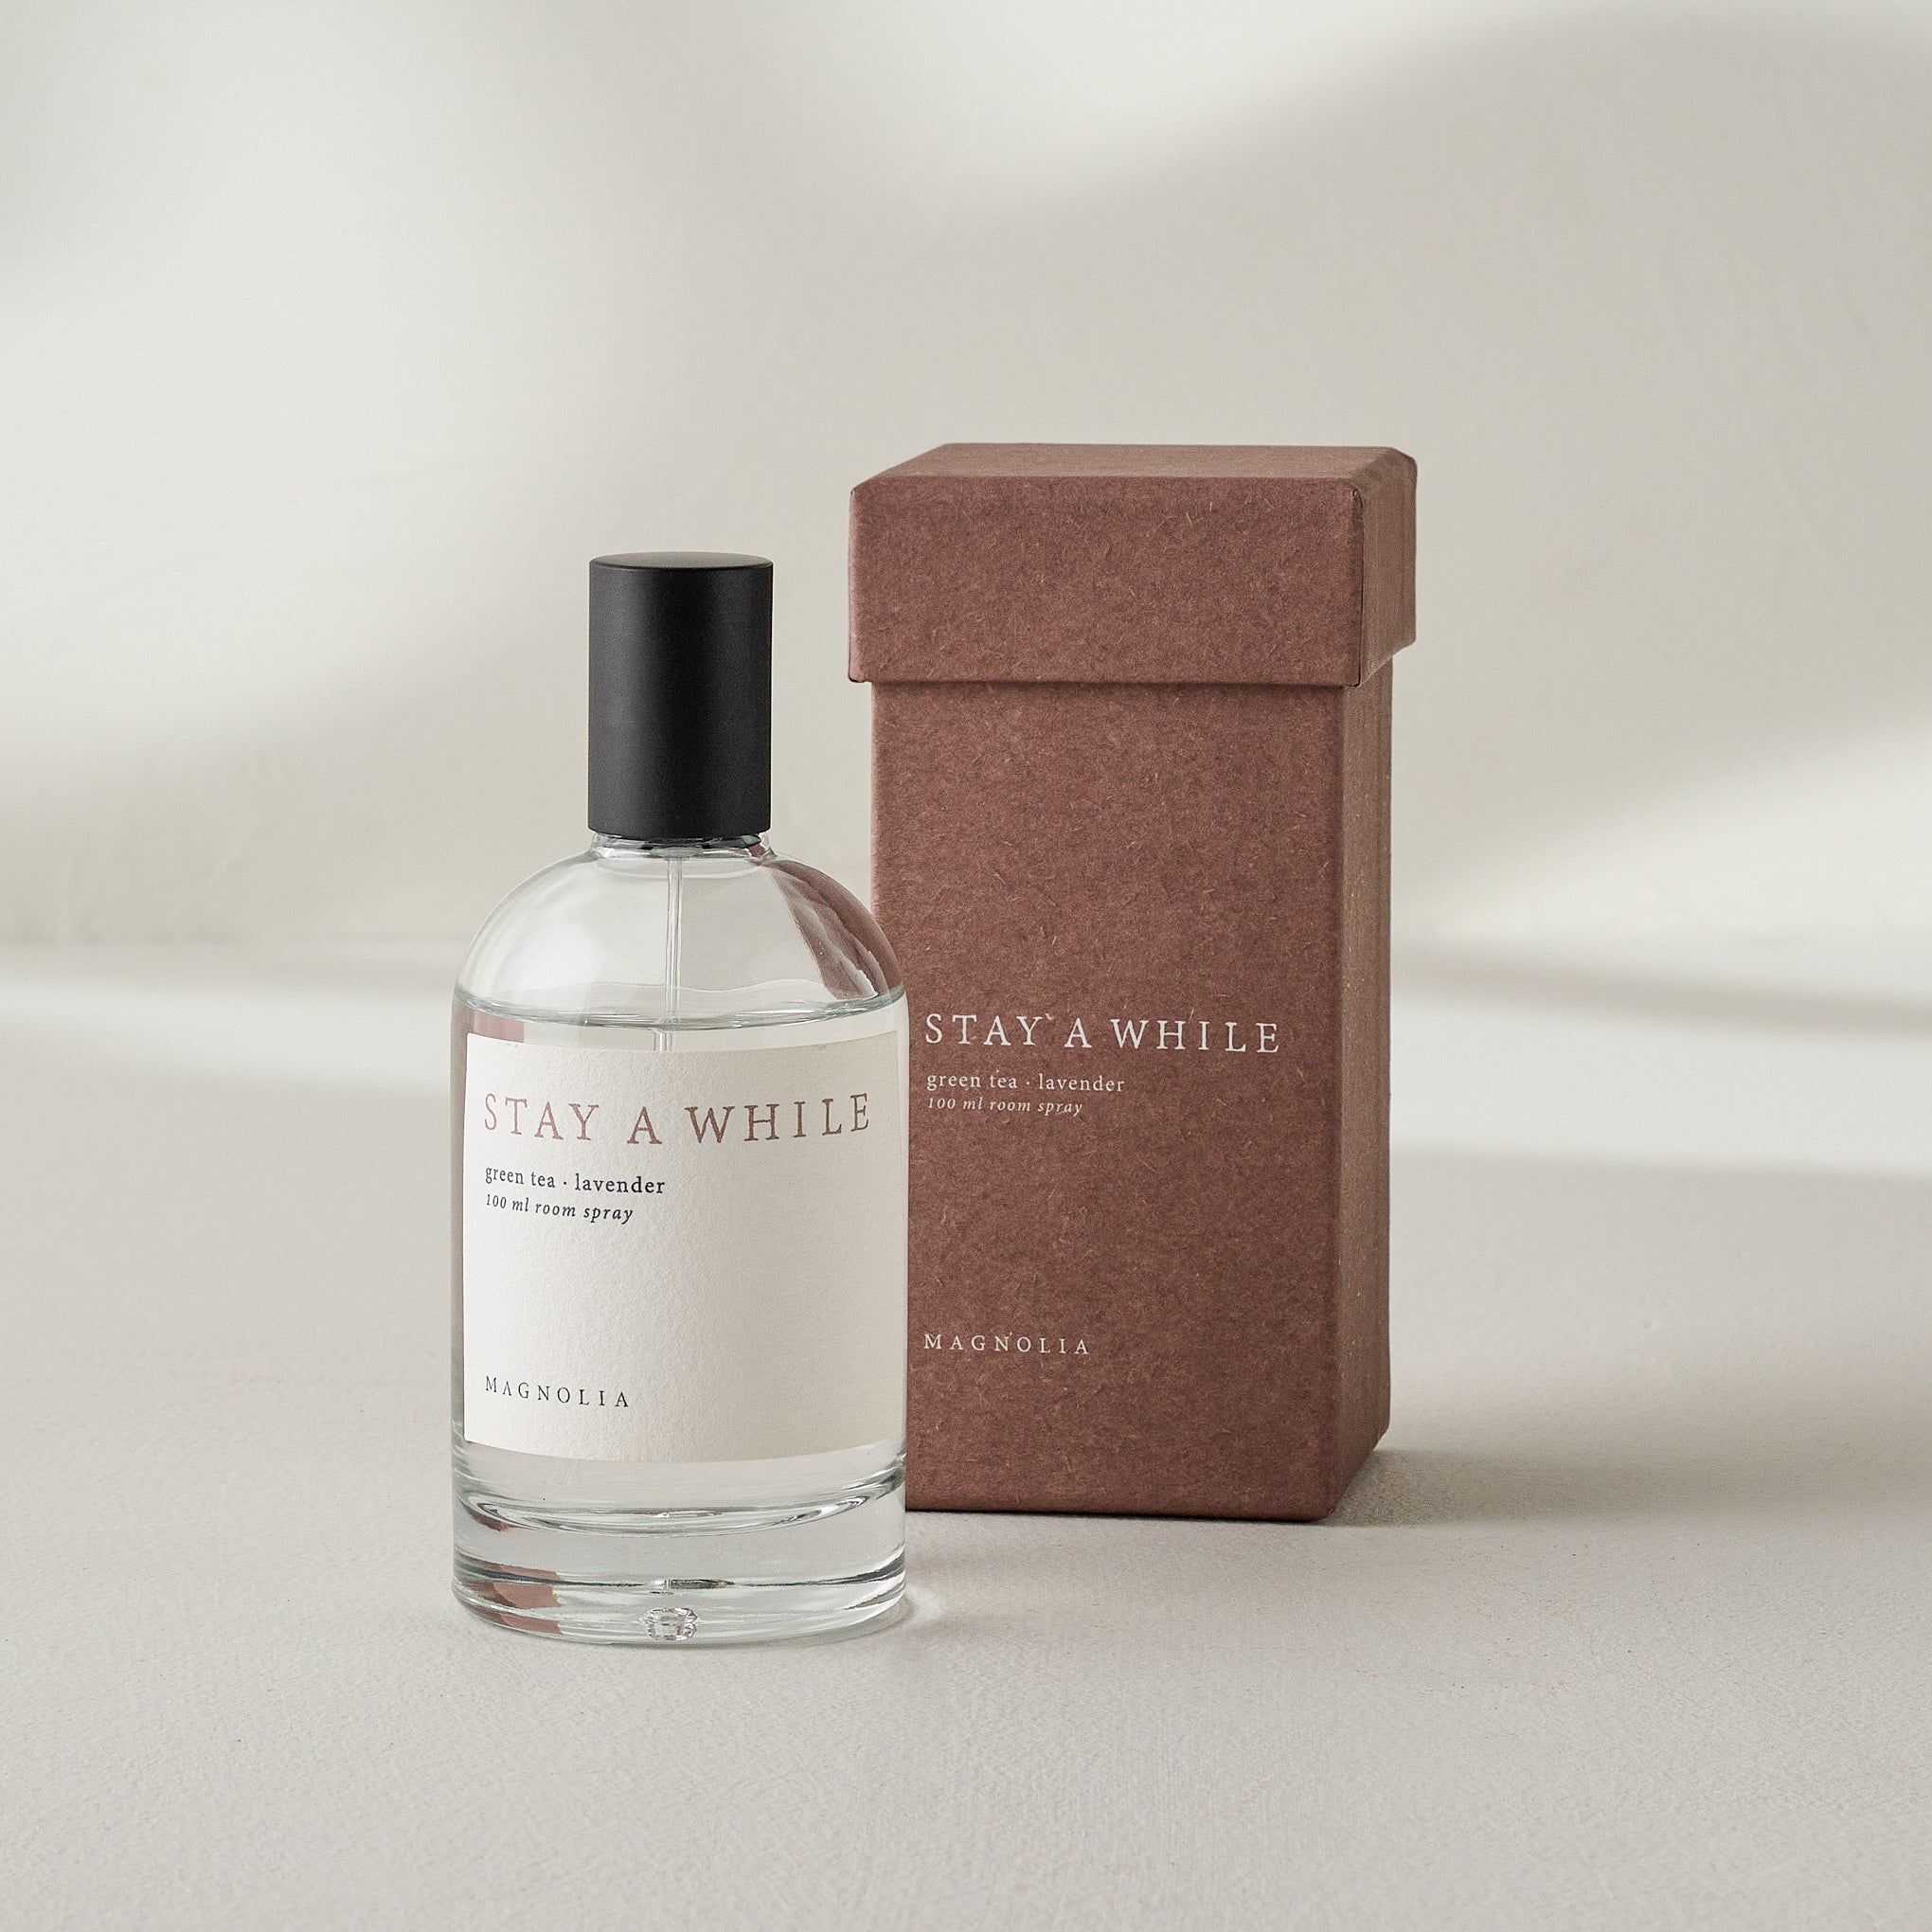 stay a while room spray with box$30.00